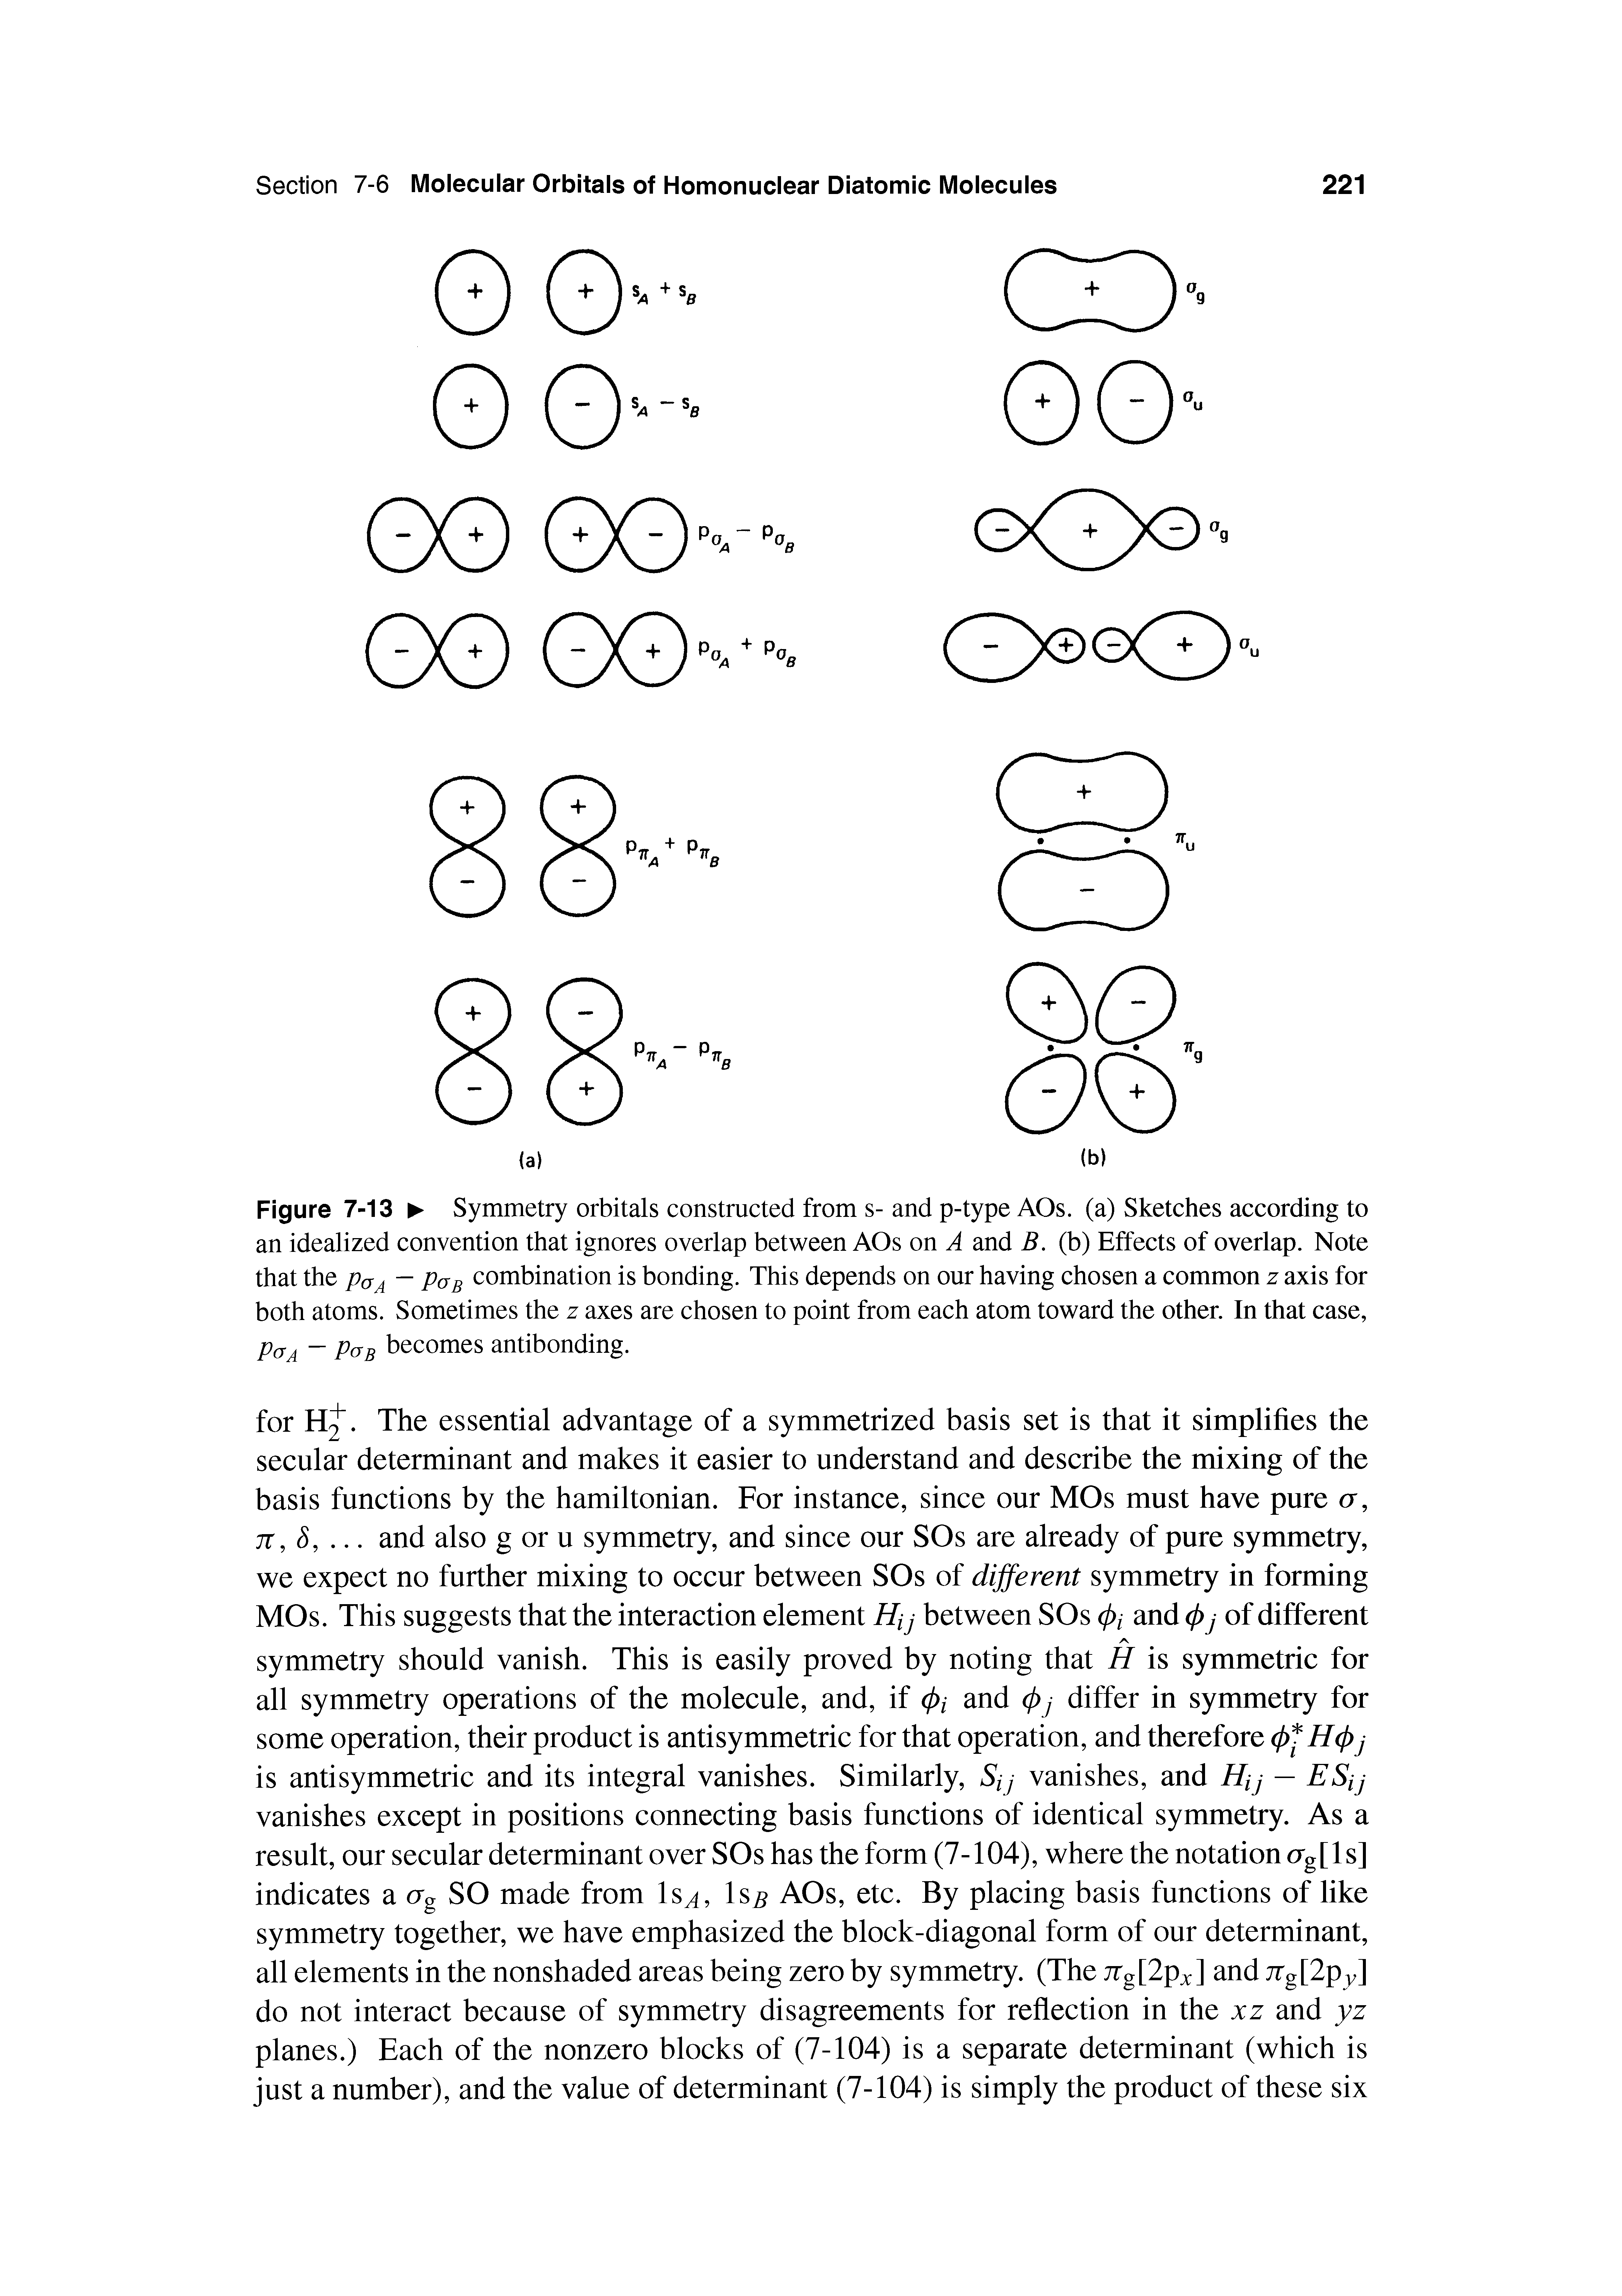 Figure 7-13 Symmetry orbitals constructed from s- and p-type AOs. (a) Sketches according to an idealized convention that ignores overlap between AOs on A and B. (b) Effects of overlap. Note that the pa — Pob combination is bonding. This depends on our having chosen a common z axis for both atoms. Sometimes the z axes are chosen to point from each atom toward the other. In that case, Pa A PaB becomes antibonding.